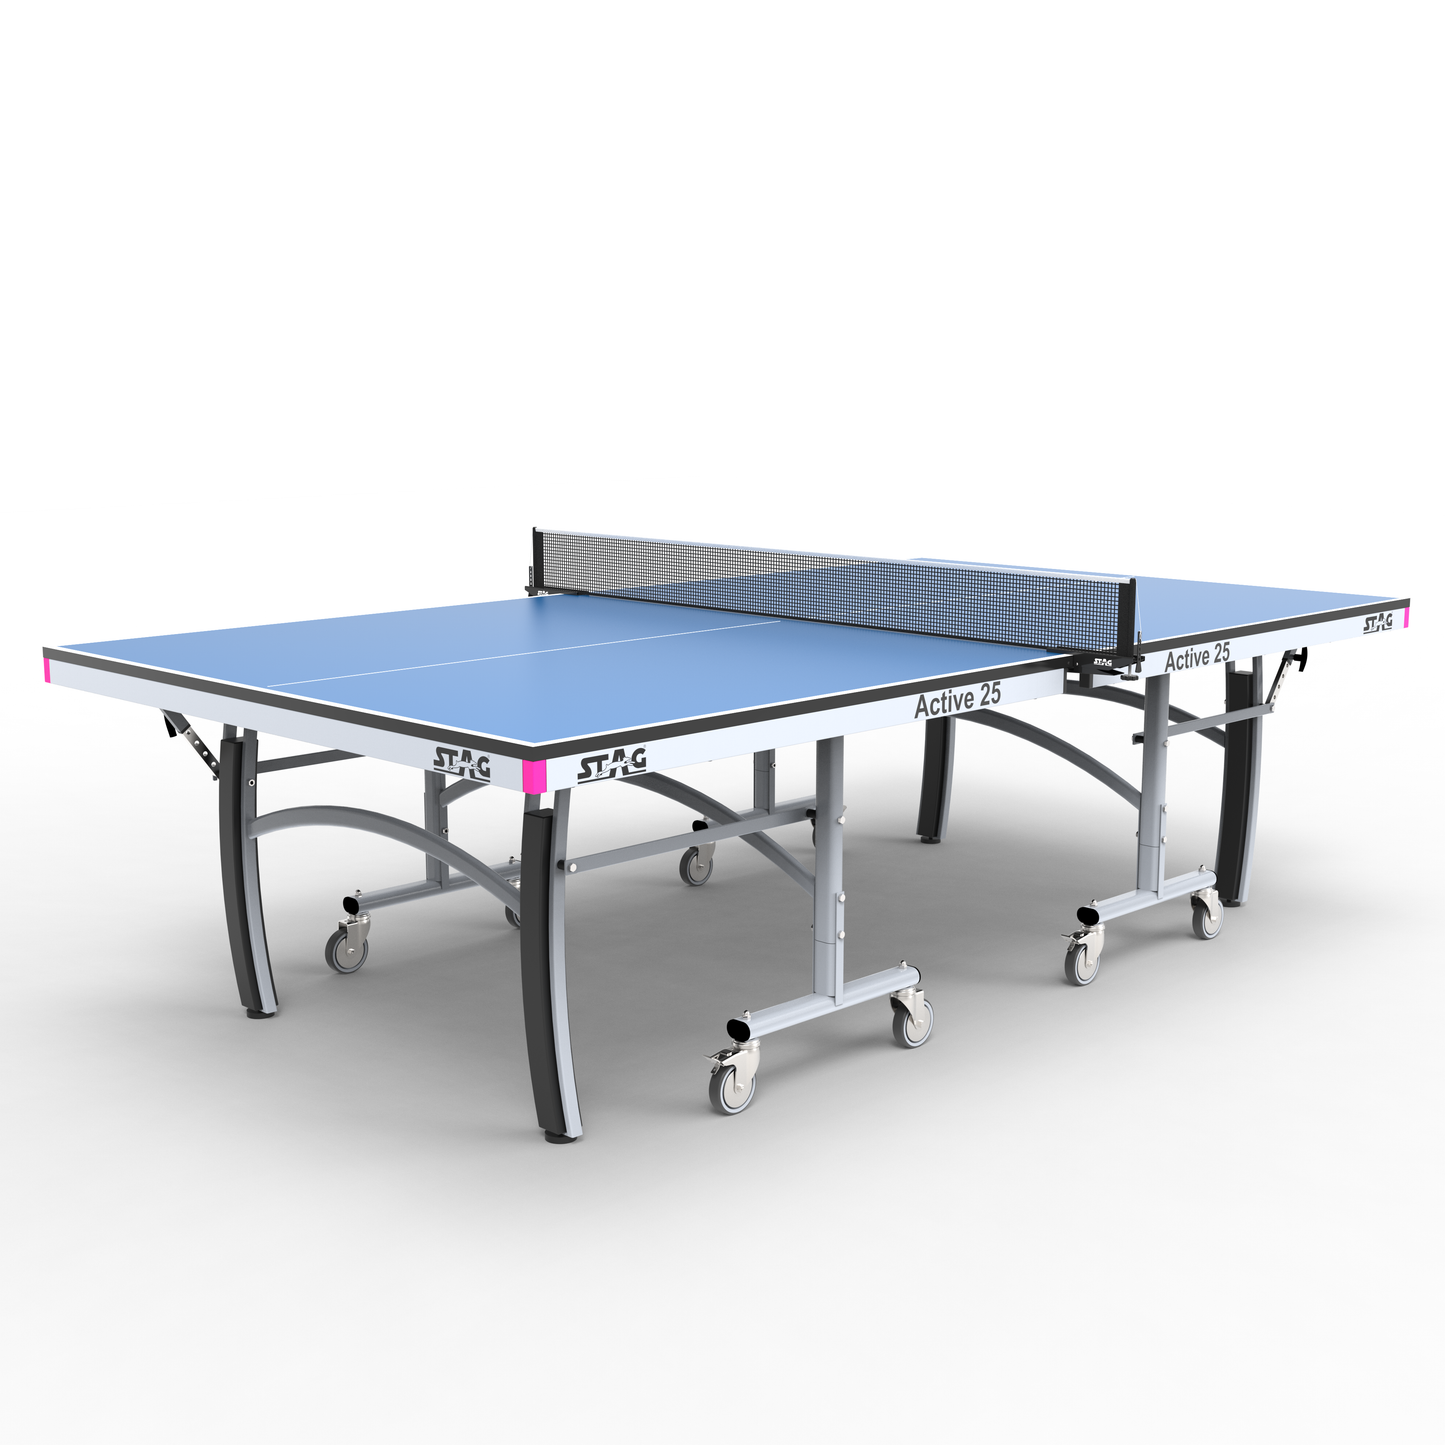 Stag Global Active Series Table Tennis TT Table